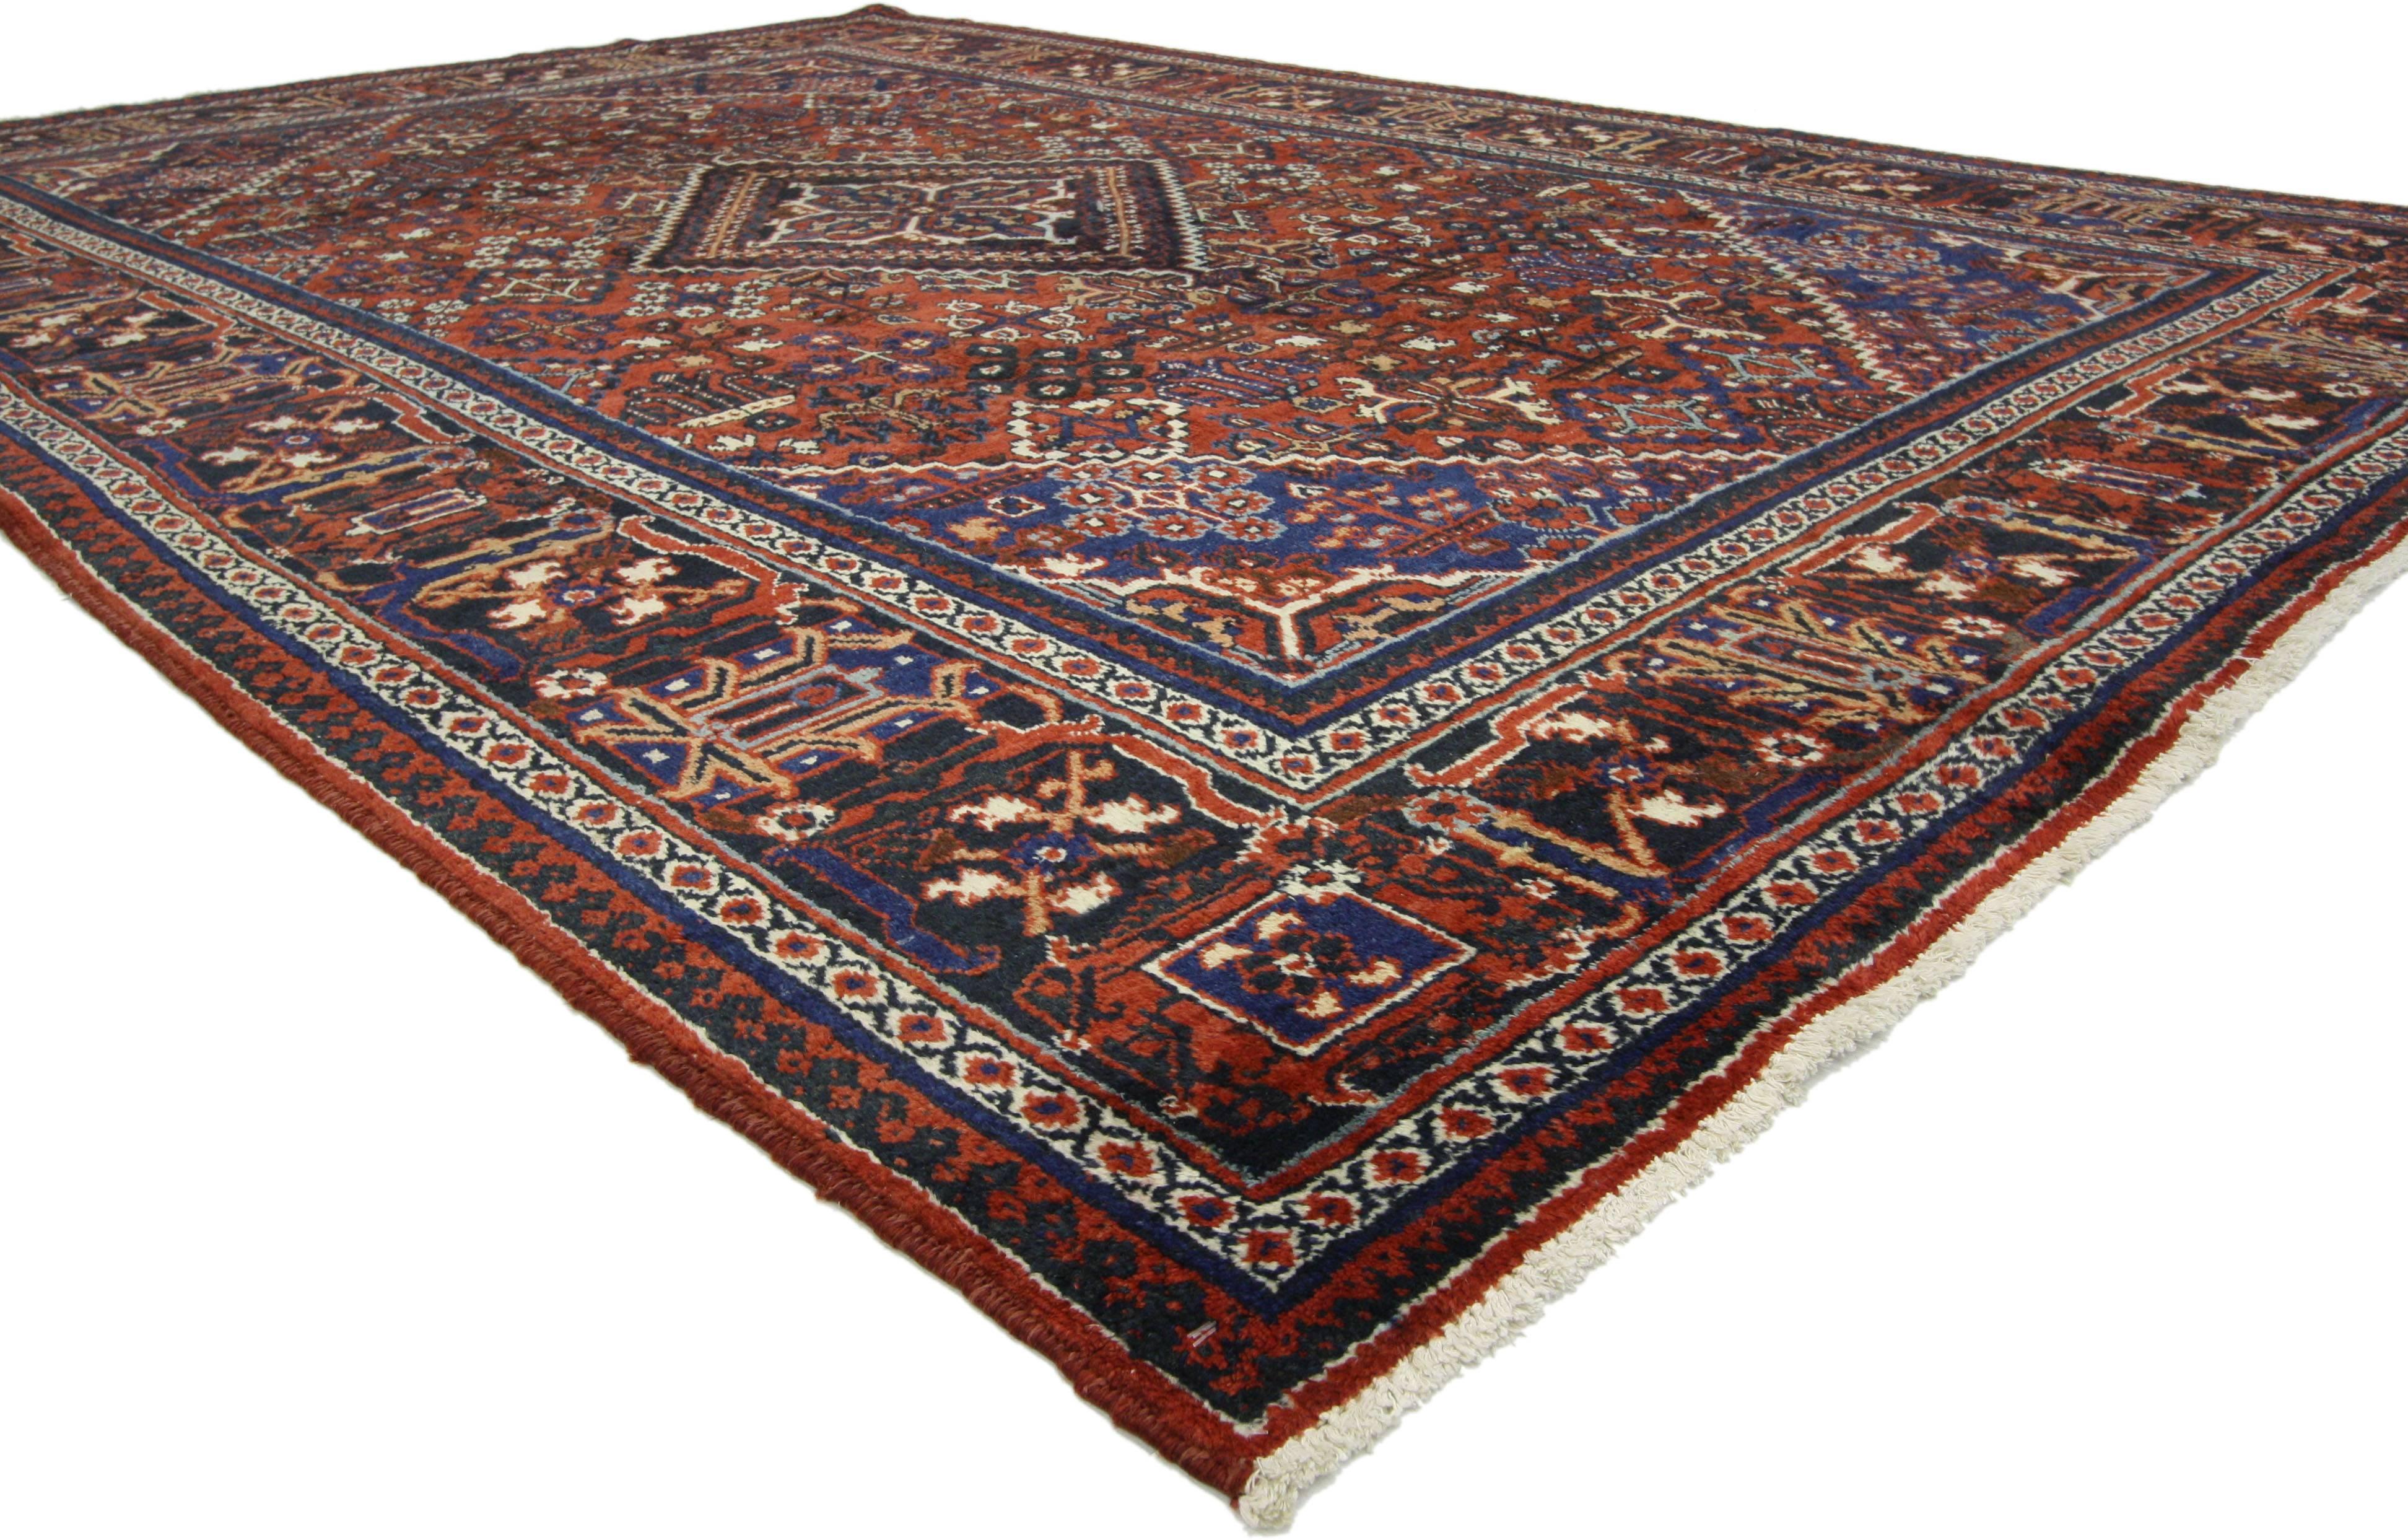 72705 Antique Persian Joshegan Rug, 06'10 X 10'03. Persian Joshegan rugs, originating from the Joshegan region in Iran's Isfahan province, are renowned for their intricate geometric patterns, vibrant colors, and durable craftsmanship. Handwoven